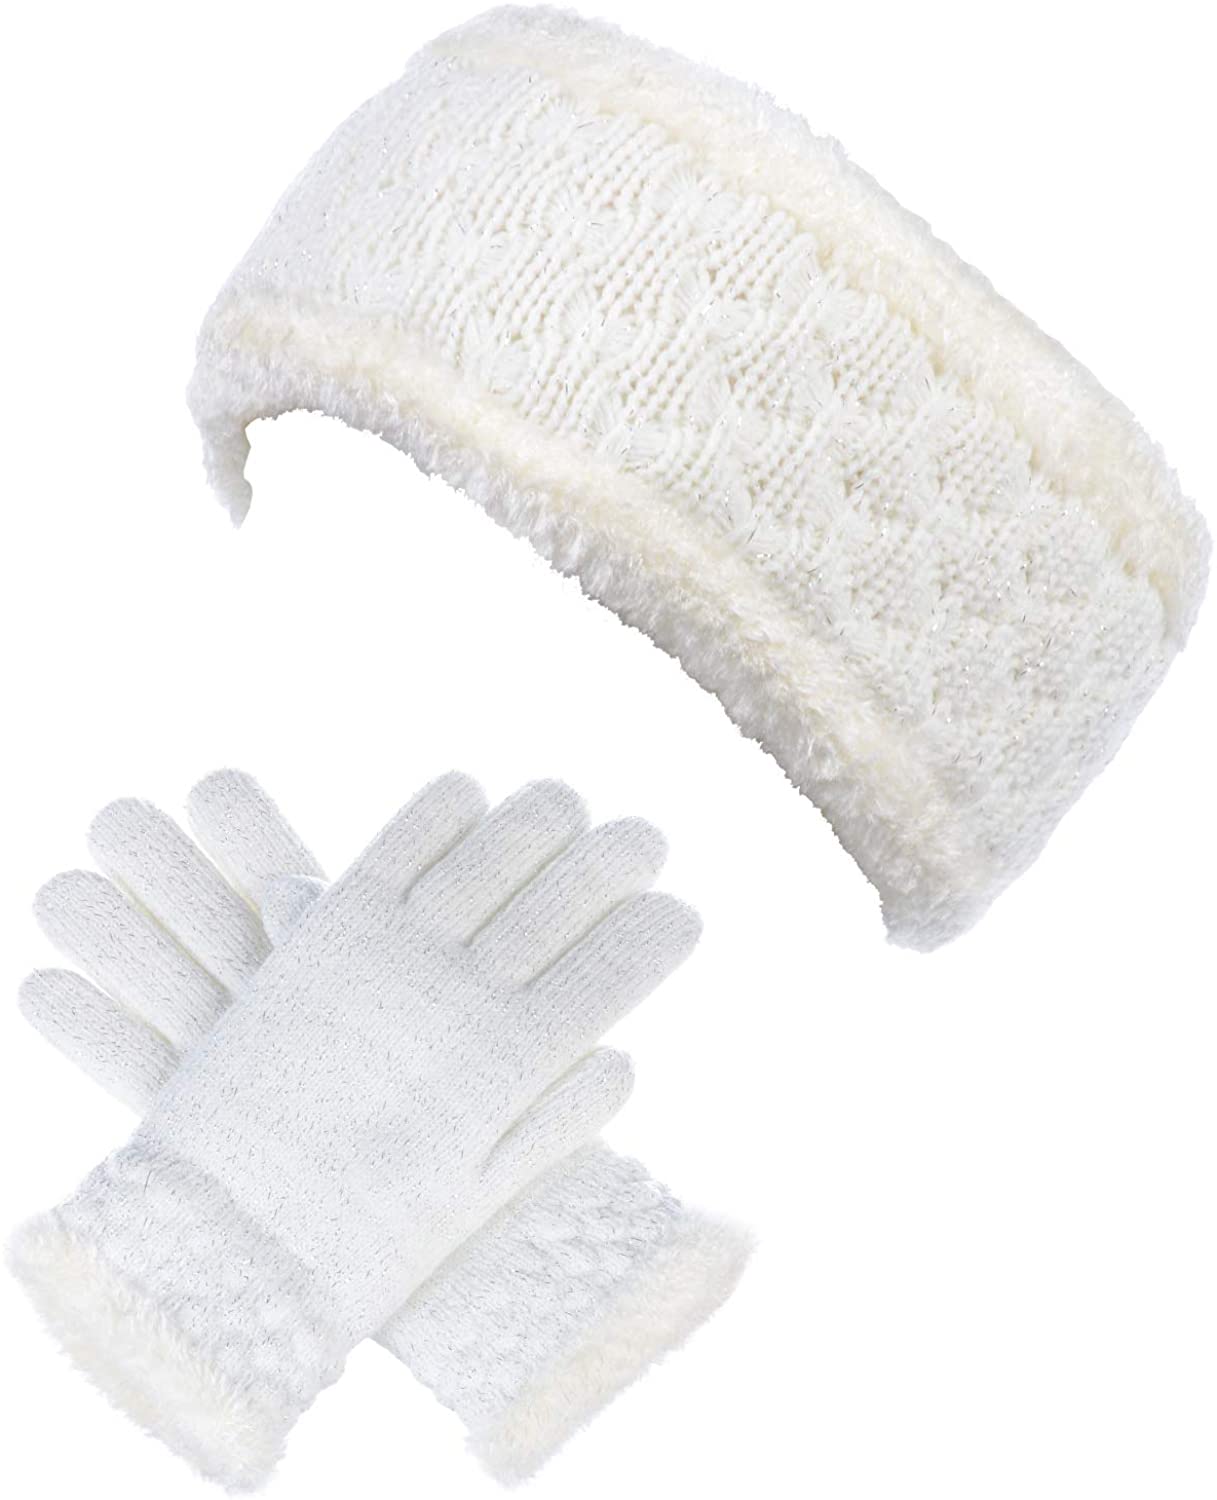 BYOS Womens Winter Cable Plush Warm Fleece Lined Knit Gloves & Headband 2 Pieces Set,Various Styles 